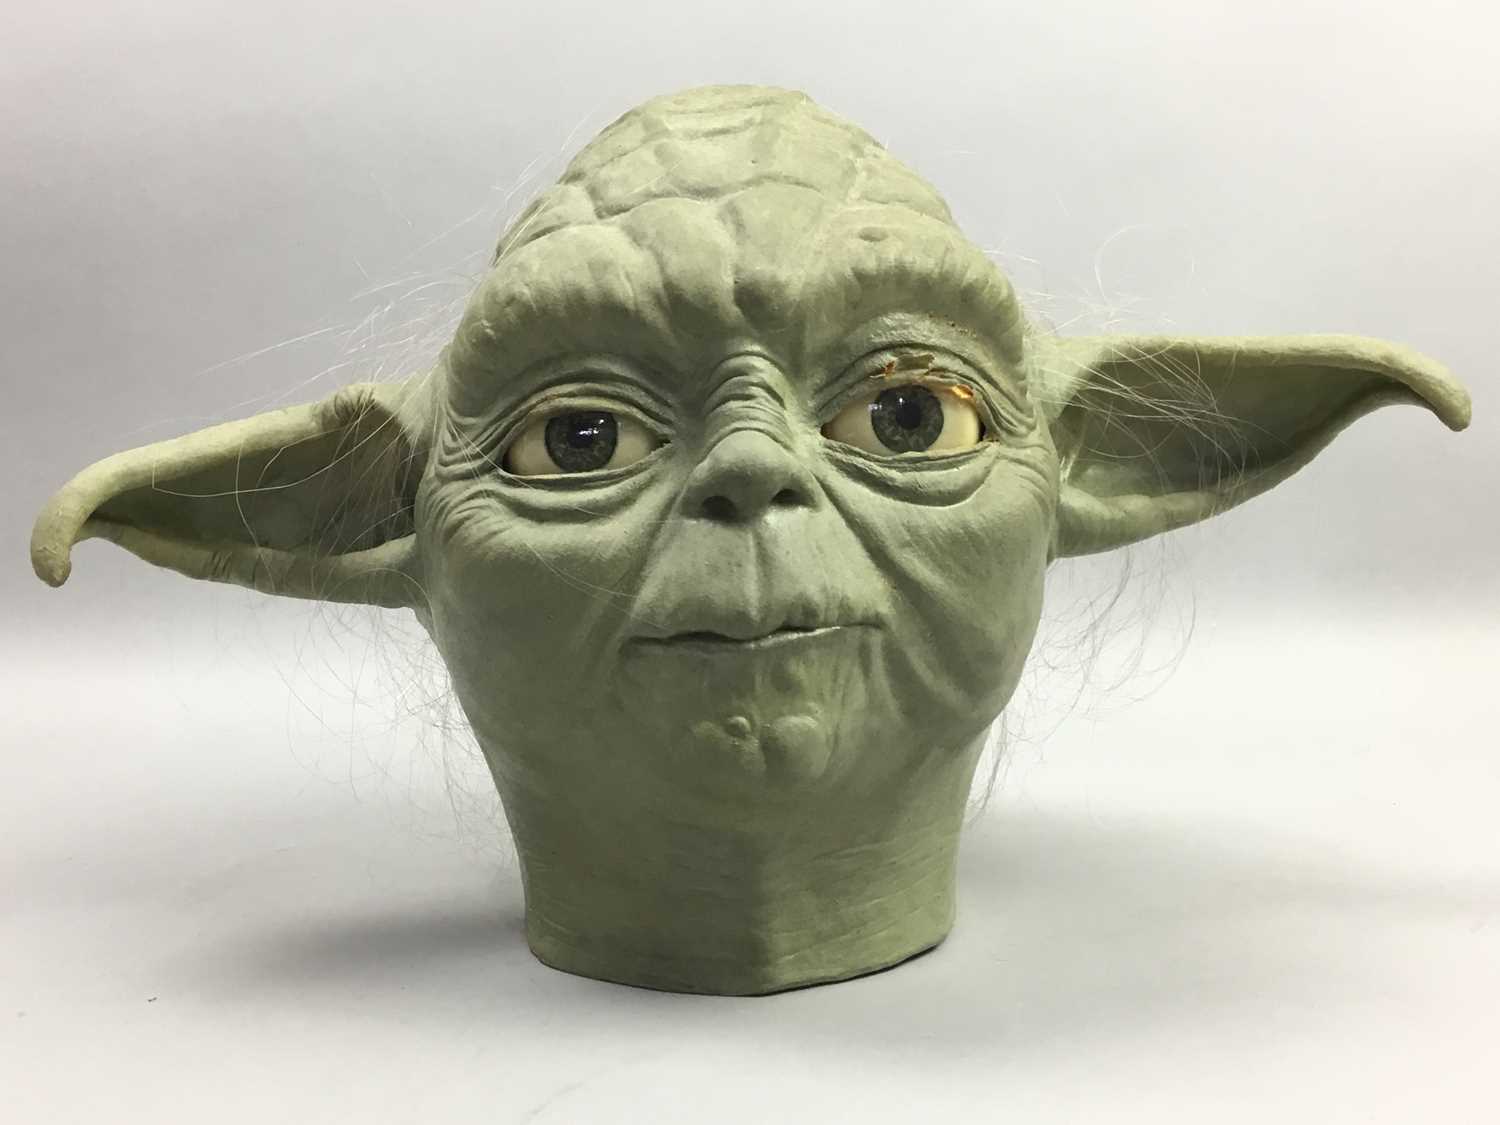 Lot 40 - A LOT OF STAR WARS MODELS AND COLLECTABLES